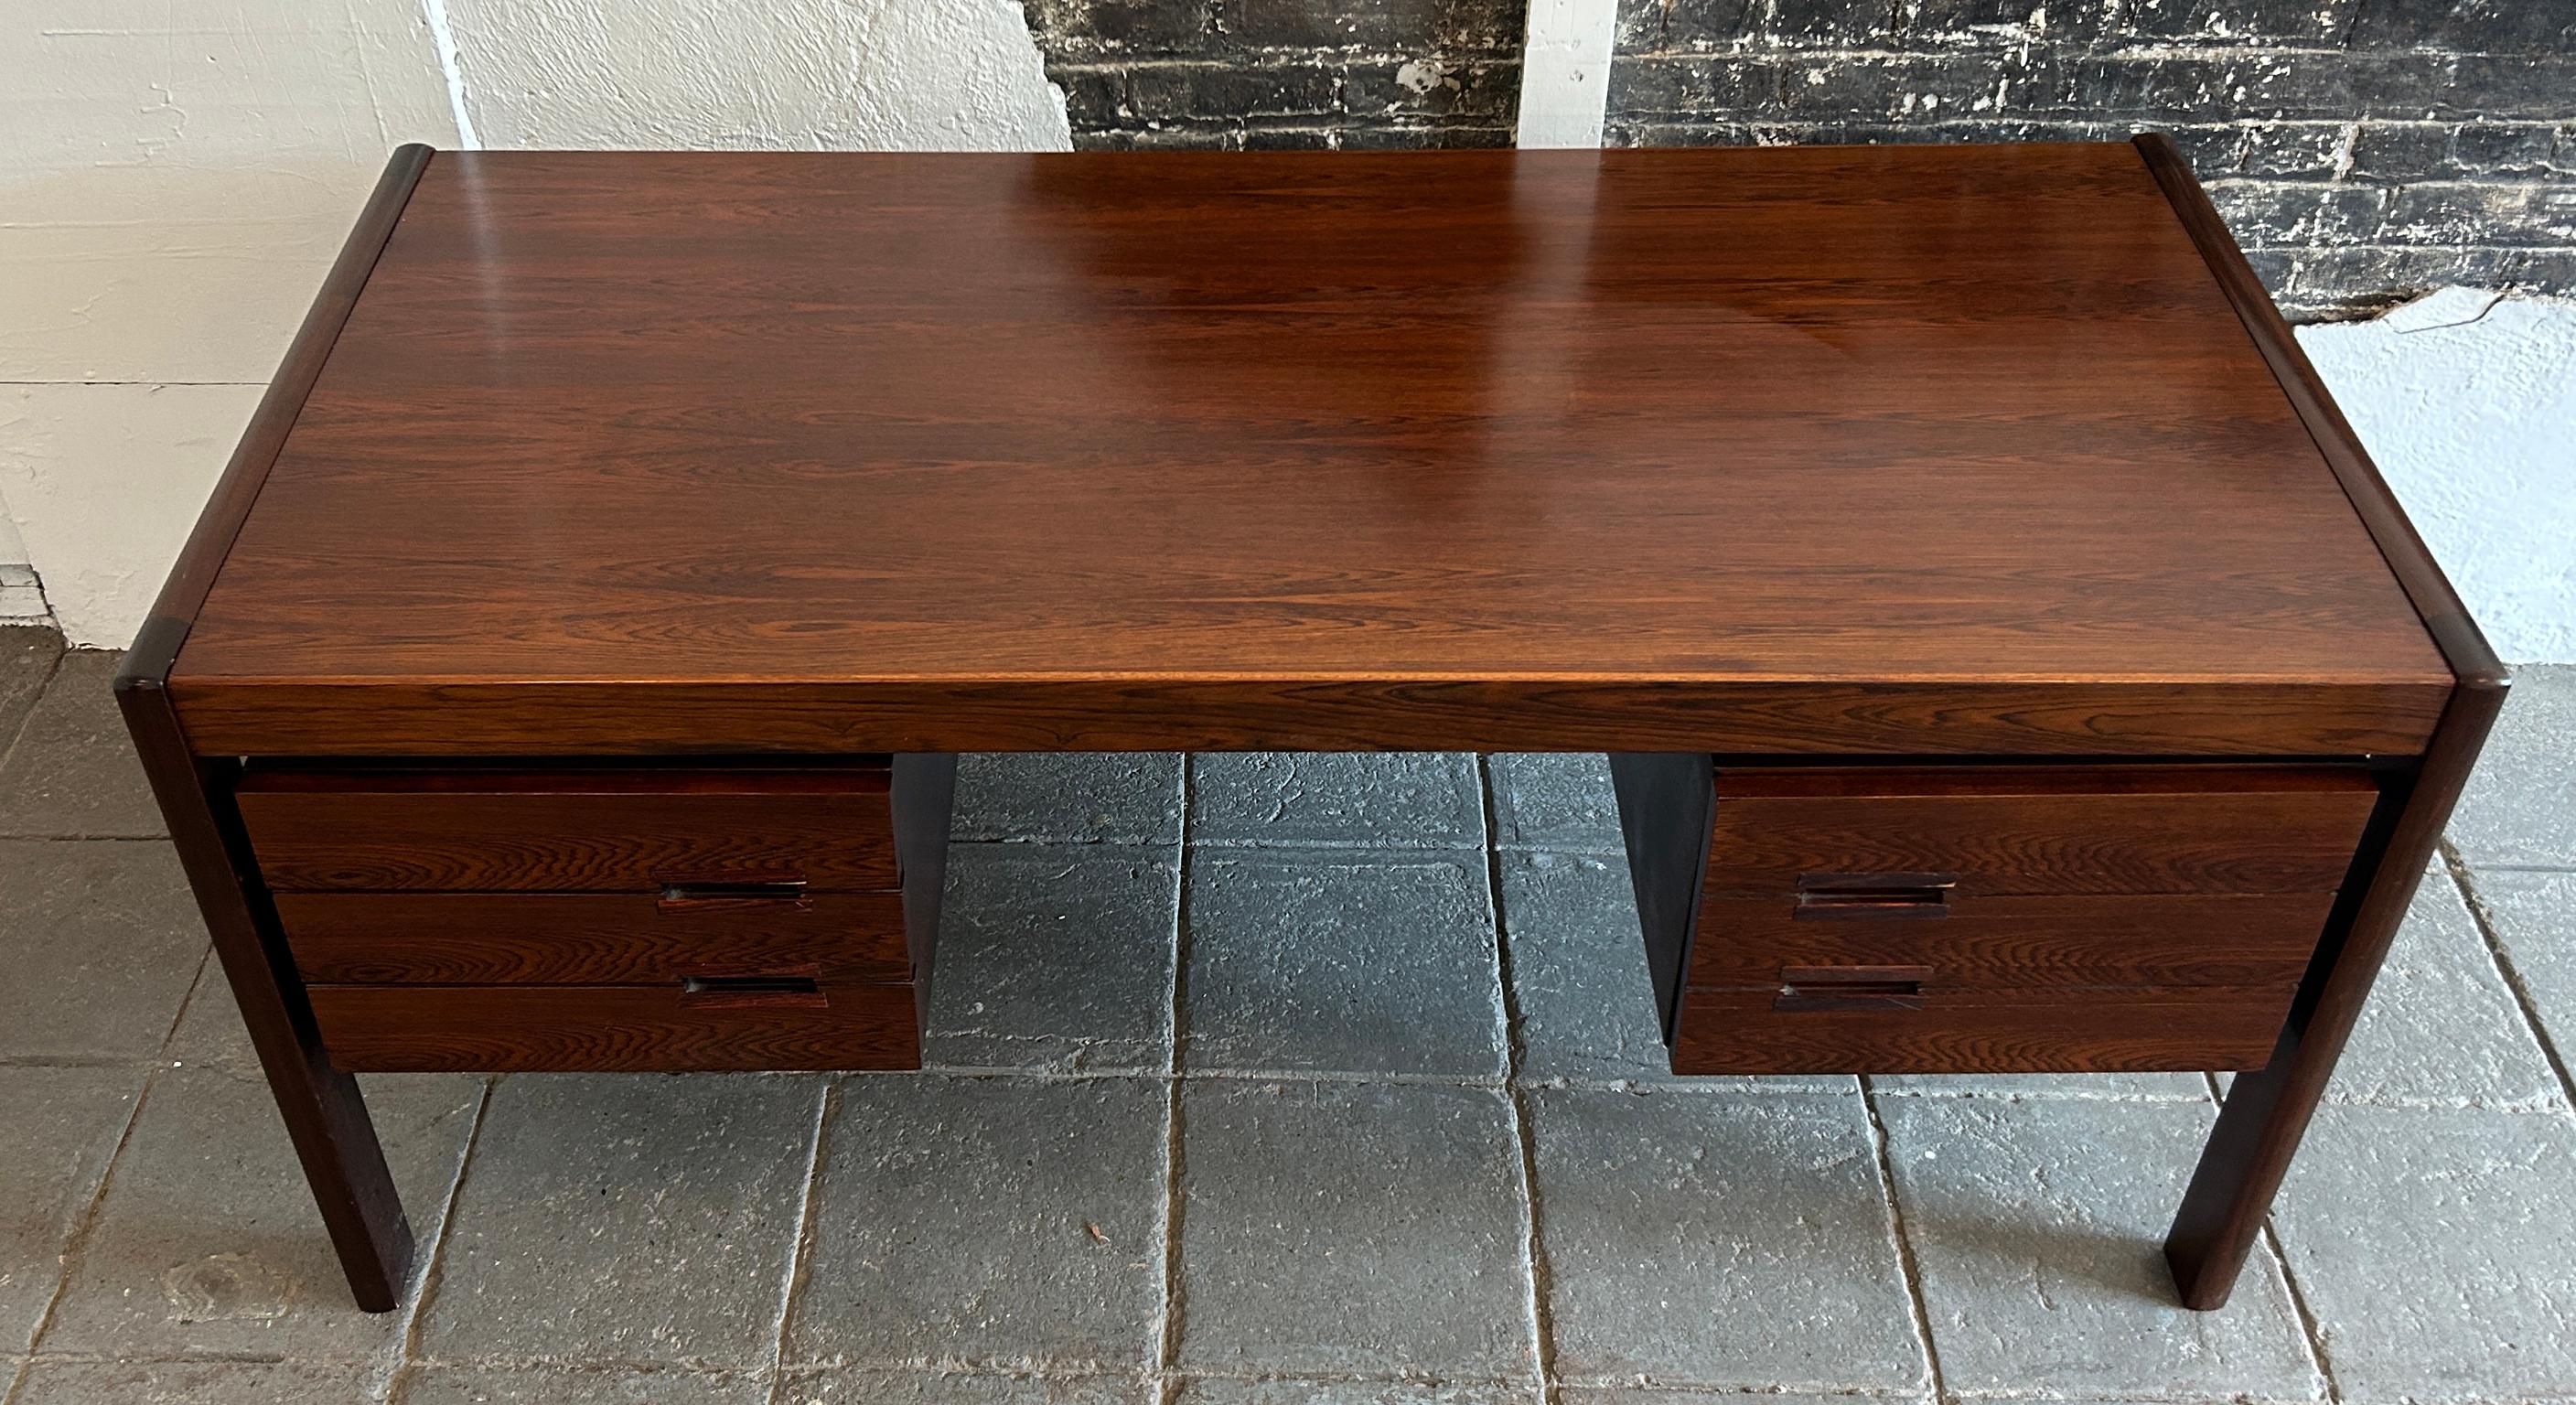 Superb Mid Century Danish Modern Rosewood Floating Desk by Dyrlund. All dark rosewood desk with 3 drawers on the left and 1 large drawer on the right for files etc. The front side of the desk is finished in rosewood and has a center bookshelf. This